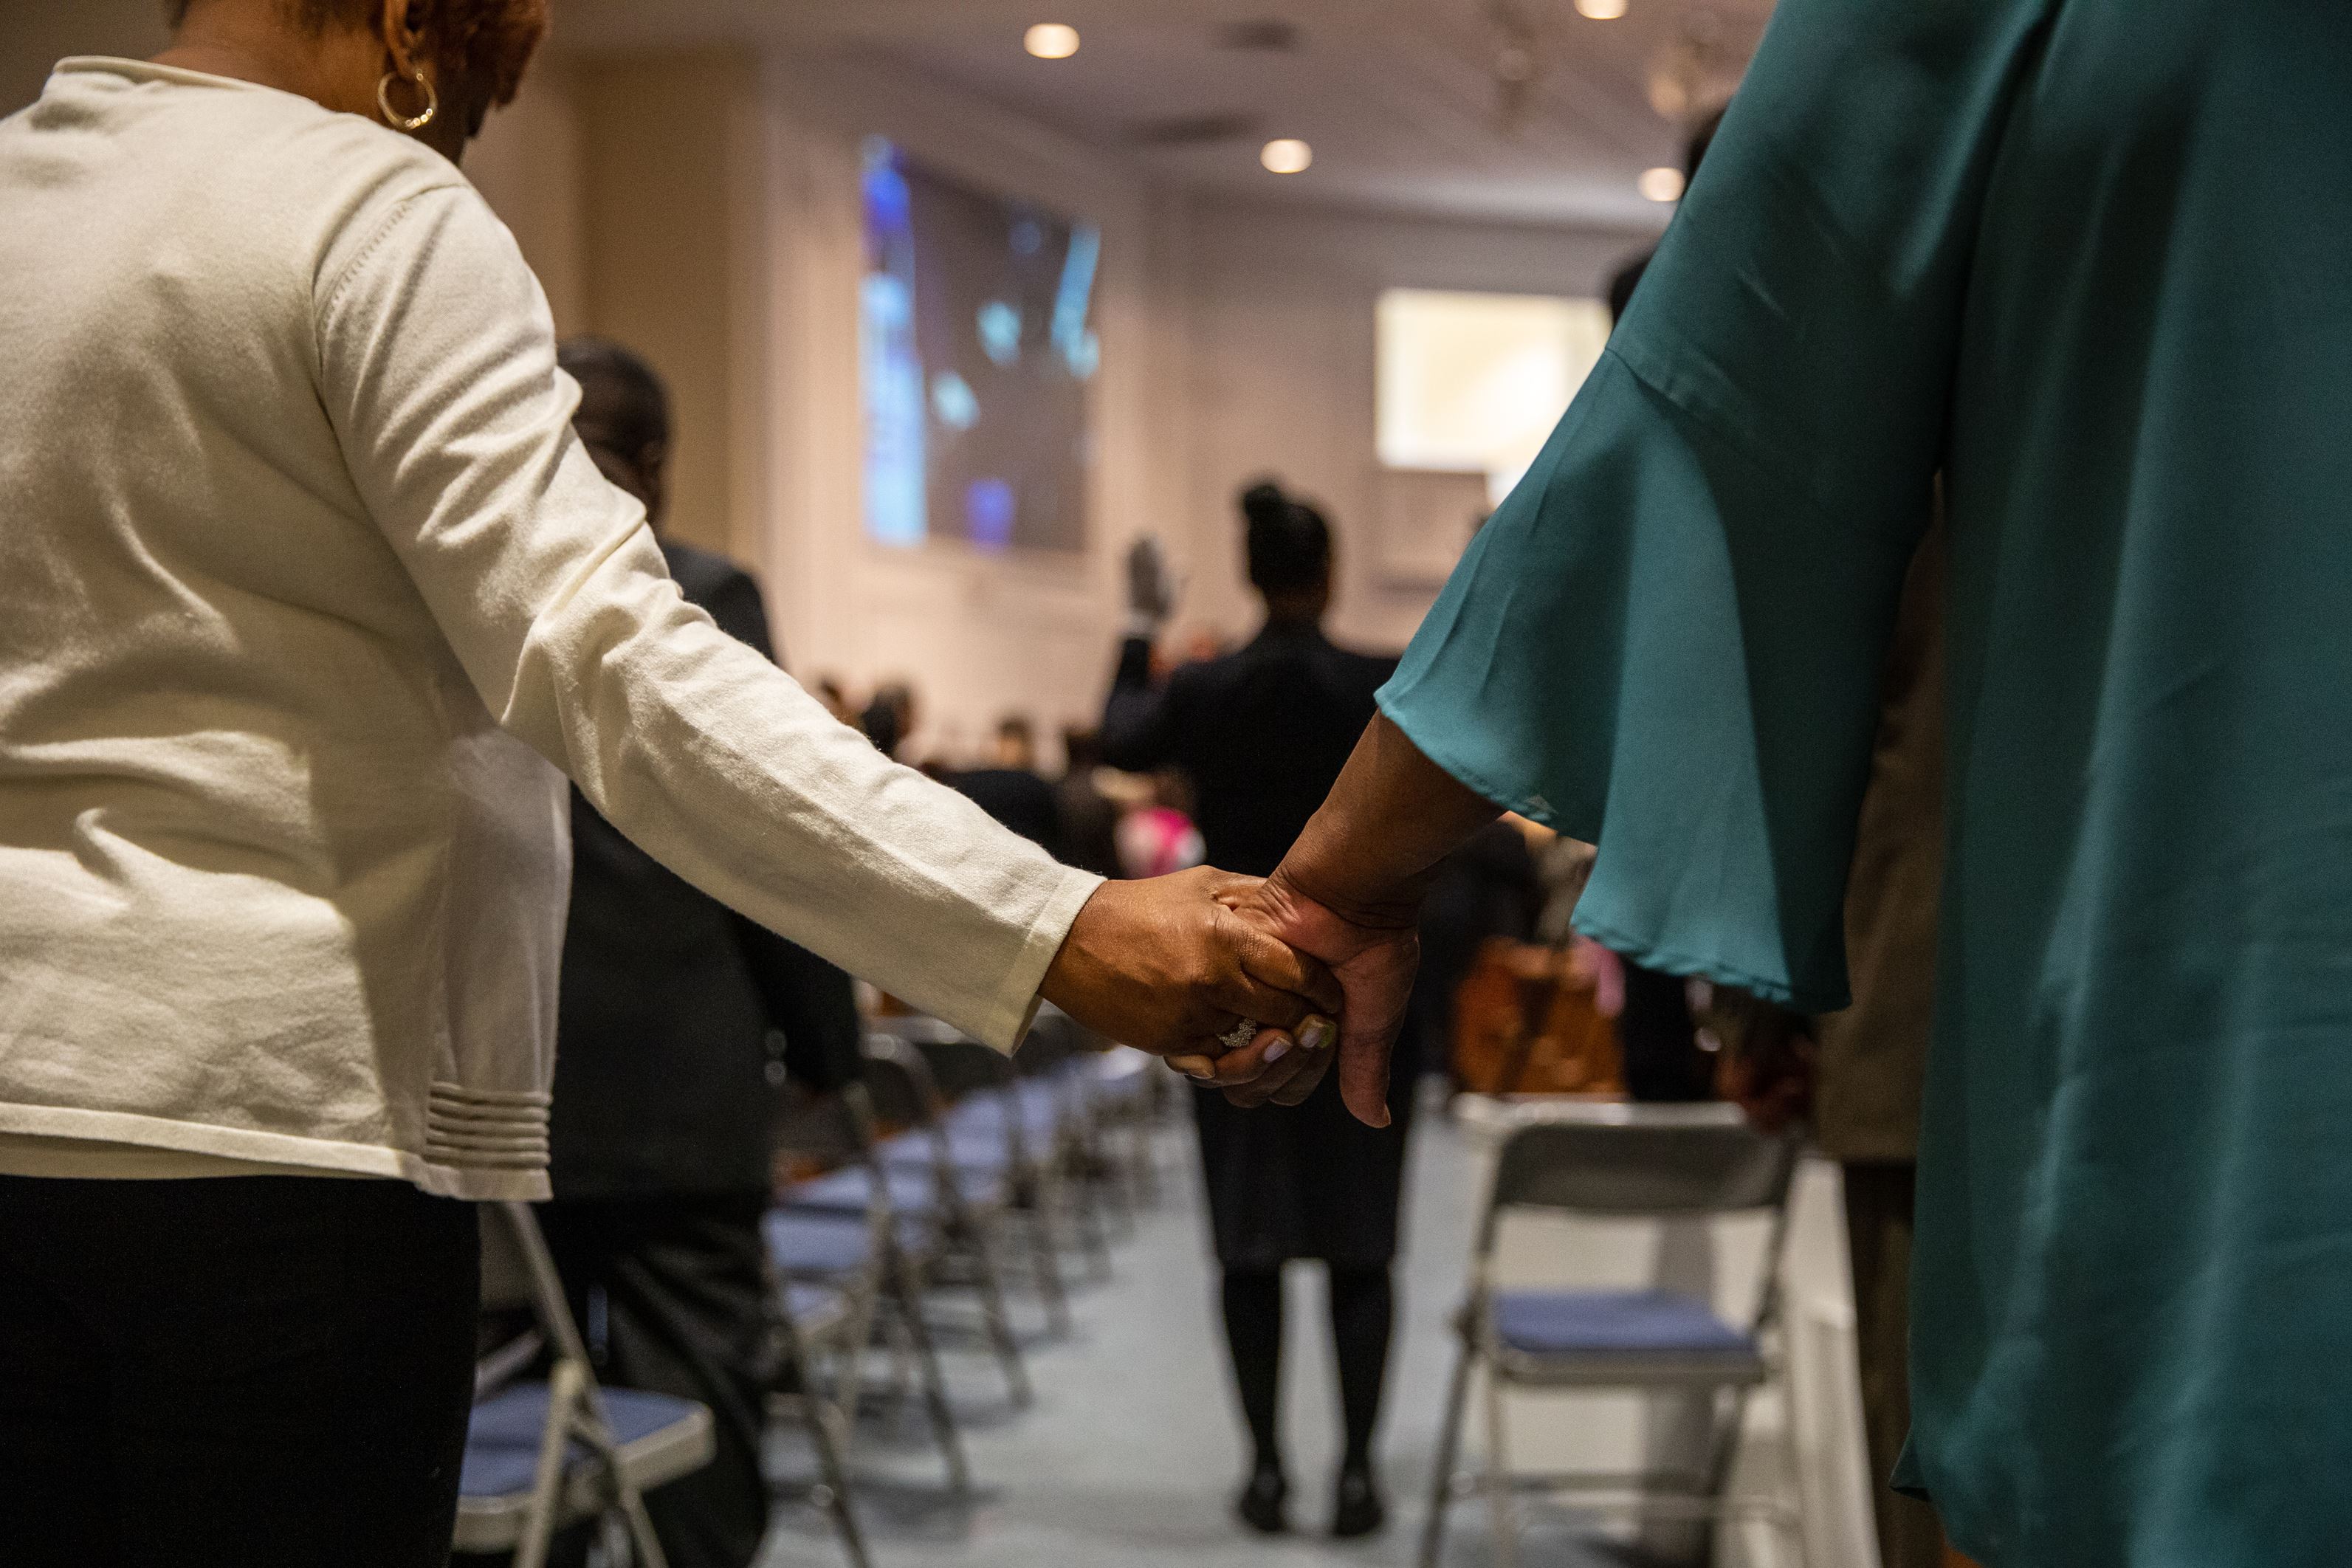 Two people hold hands in a church in the USA